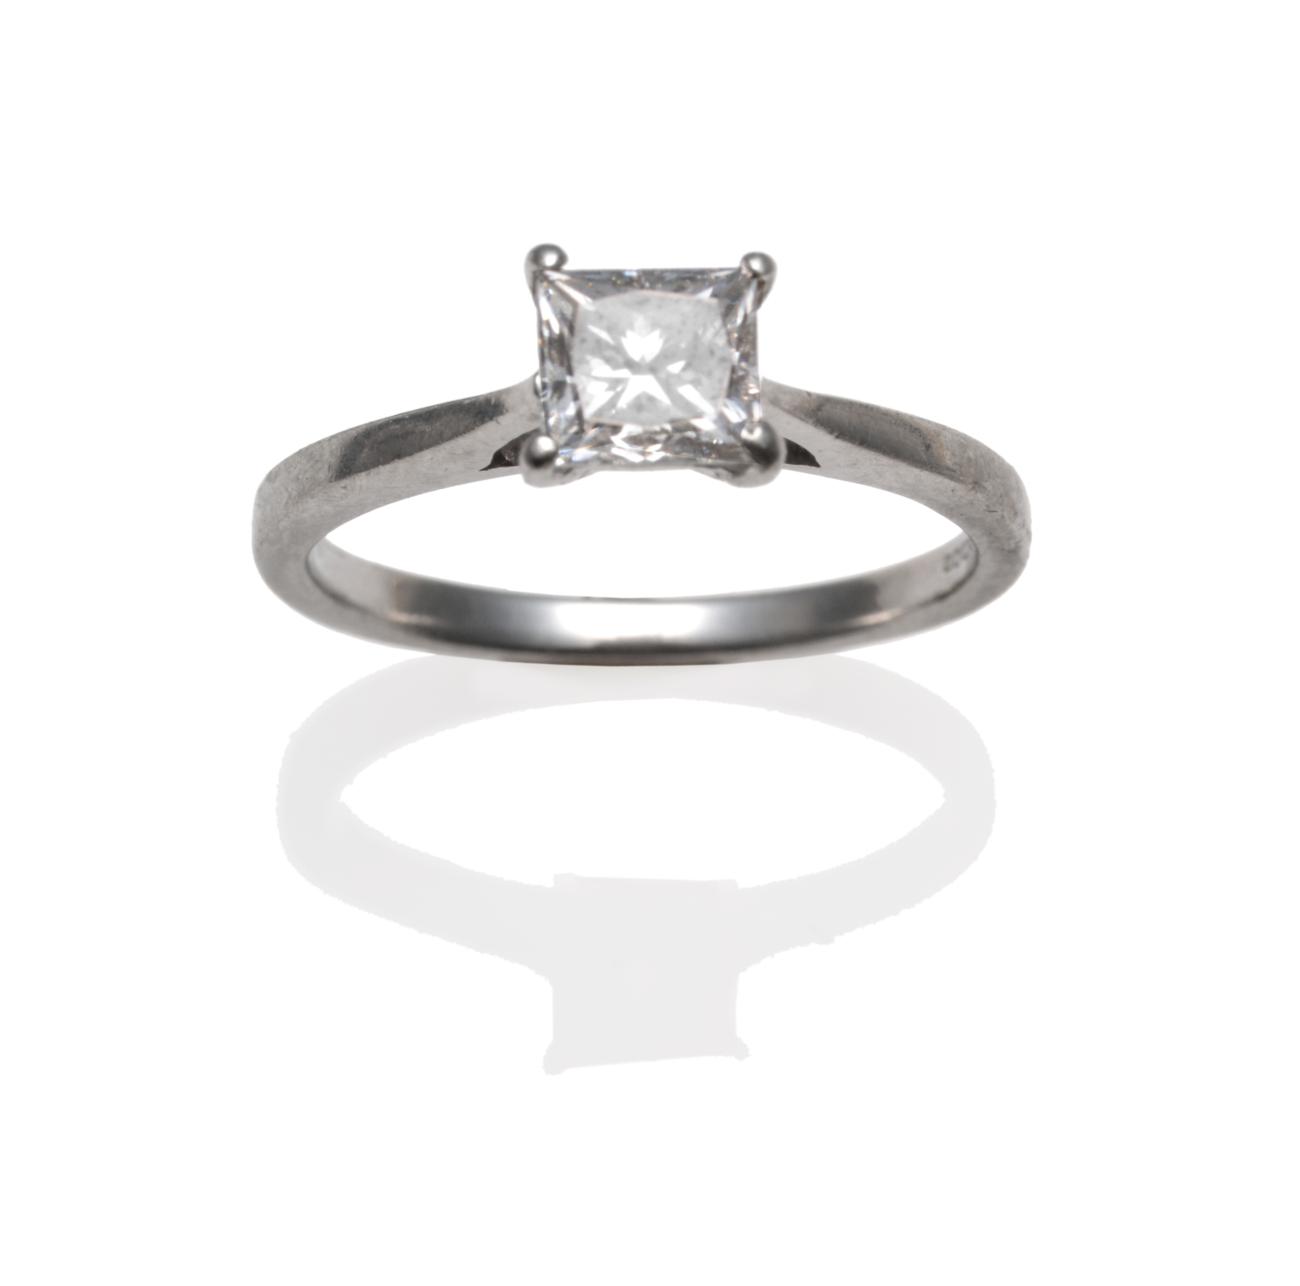 Lot 219 - A Platinum Diamond Solitaire Ring, the princess cut diamond in a claw setting on a tapered shoulder